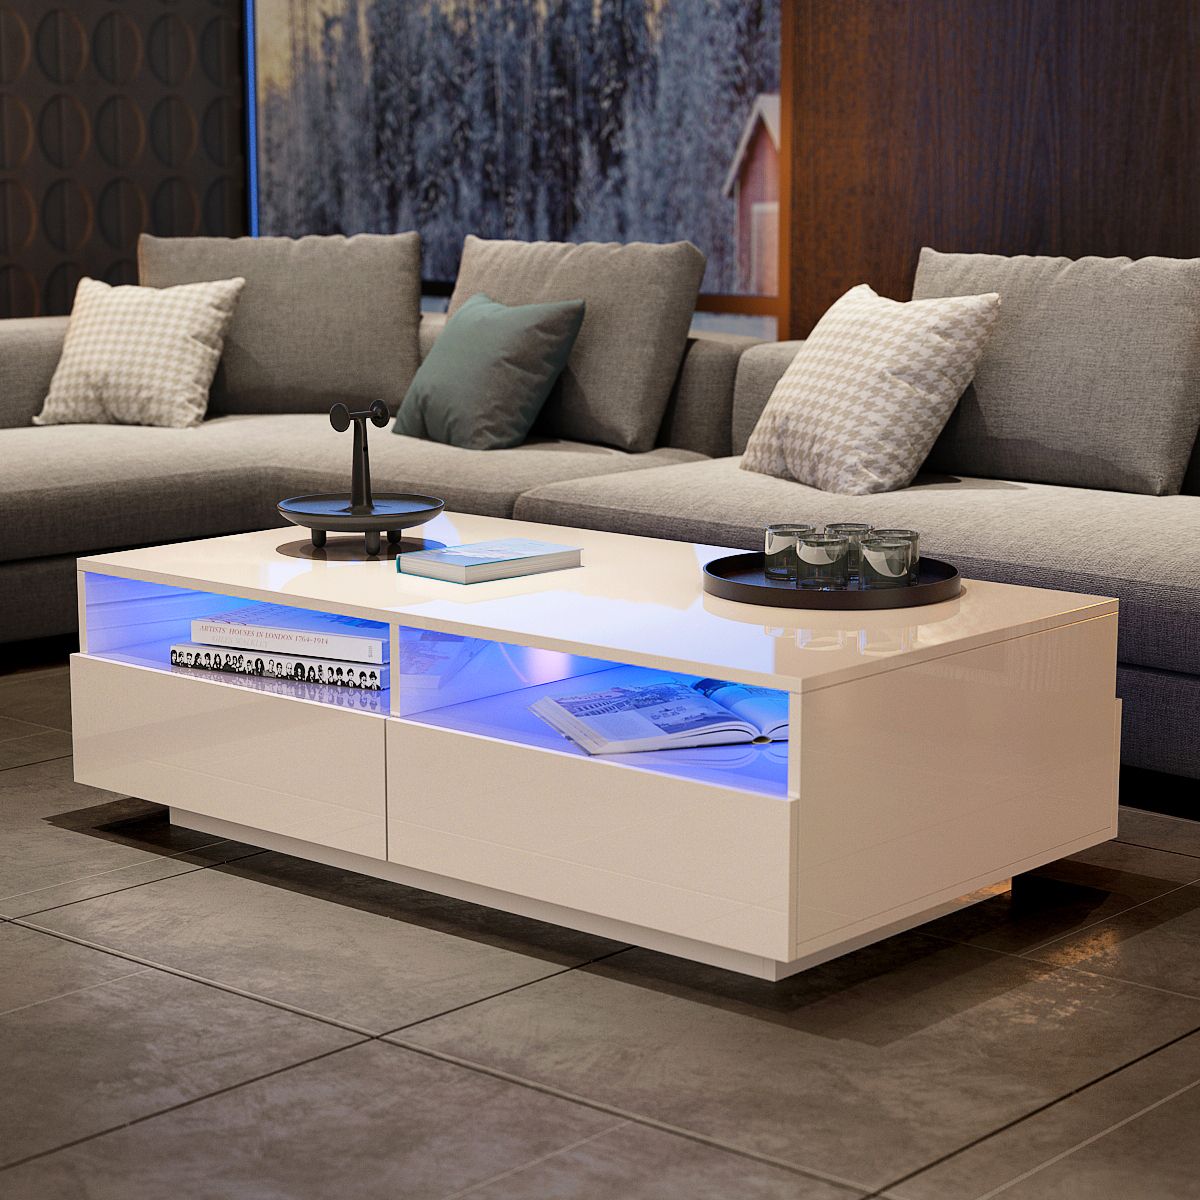 White High Gloss Coffee Table With Led Lights : High Gloss White Coffee Inside Coffee Tables With Drawers And Led Lights (Gallery 1 of 20)